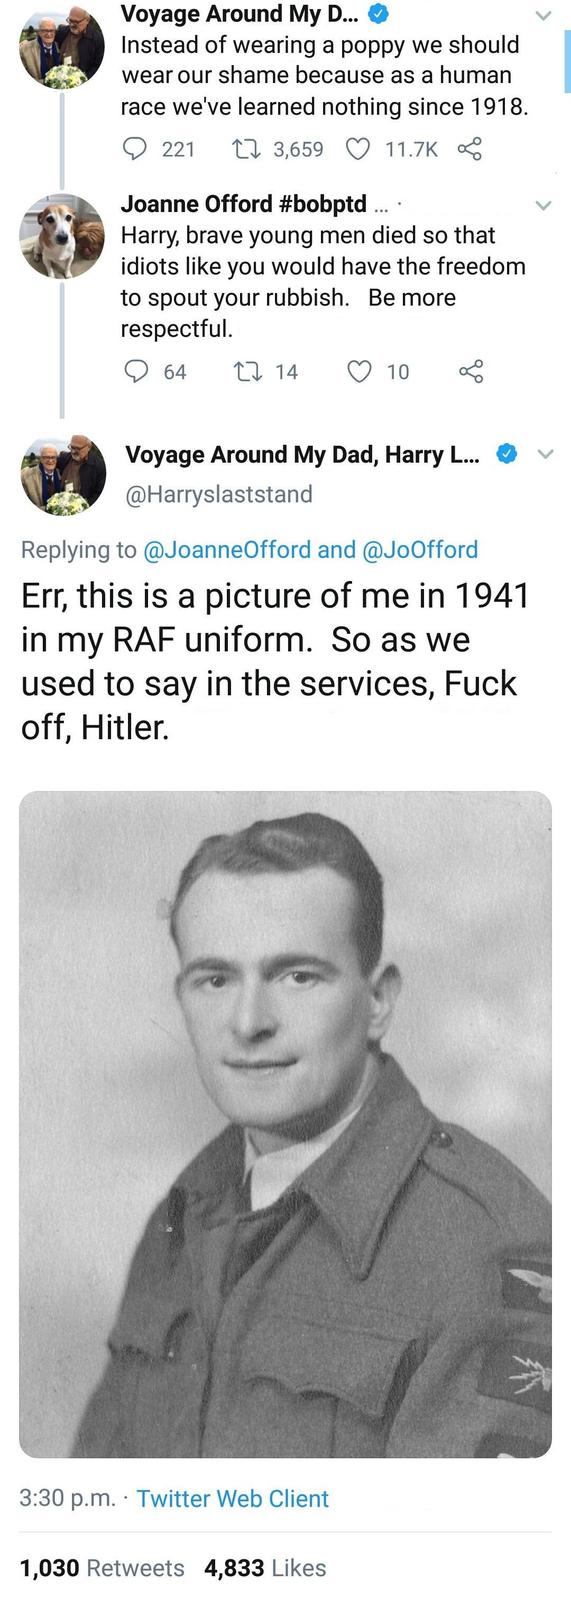 human behavior - Voyage Around My D... Instead of wearing a poppy we should wear our shame because as a human race we've learned nothing since 1918. 221 17 3,659 Joanne Offord .... Harry, brave young men died so that idiots you would have the freedom to s